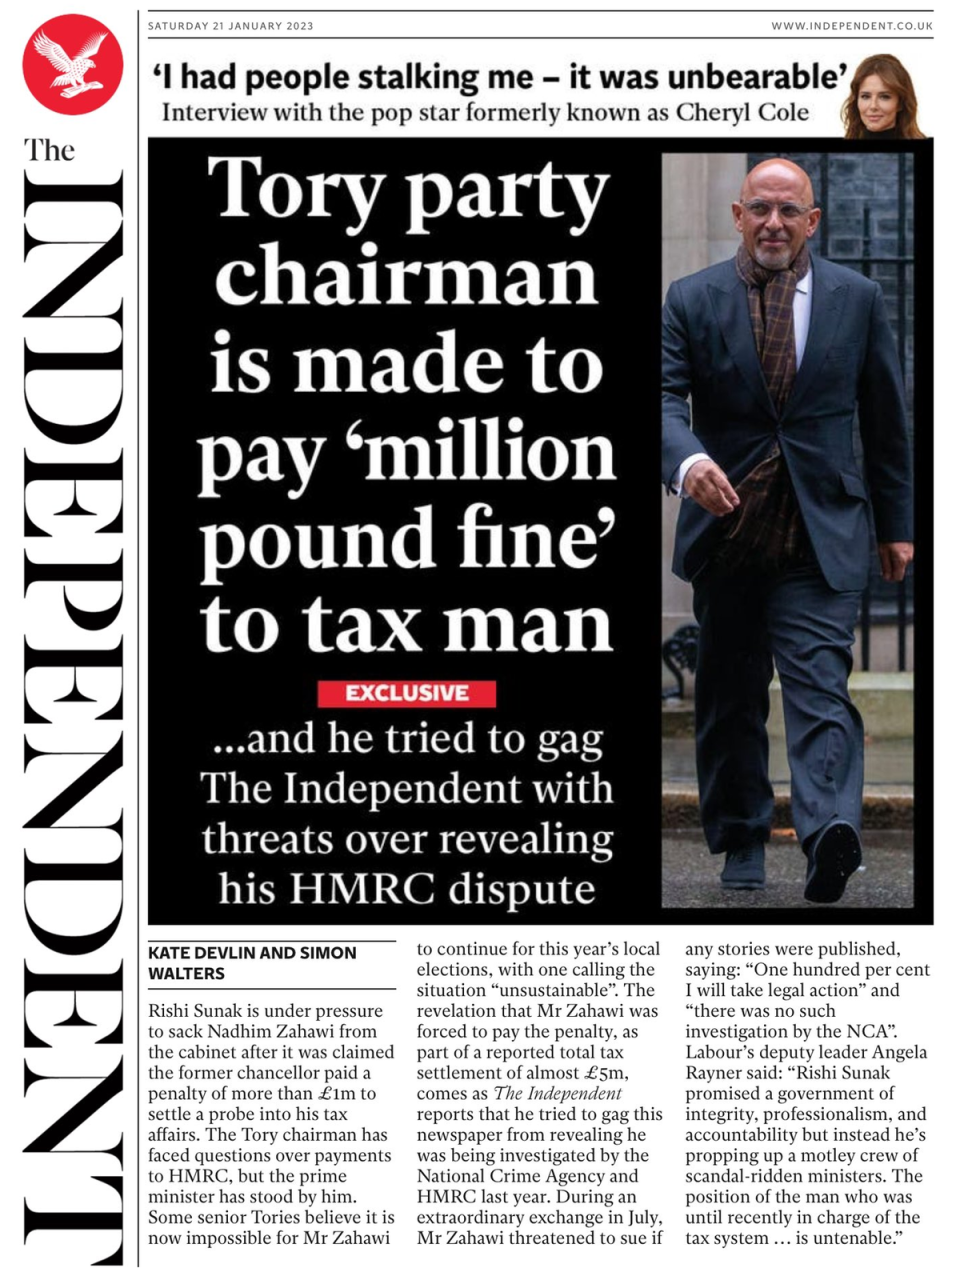 Zahawi tried to stop this publication from exposing the investigation by threatening to sue if the information was published (The Independent)